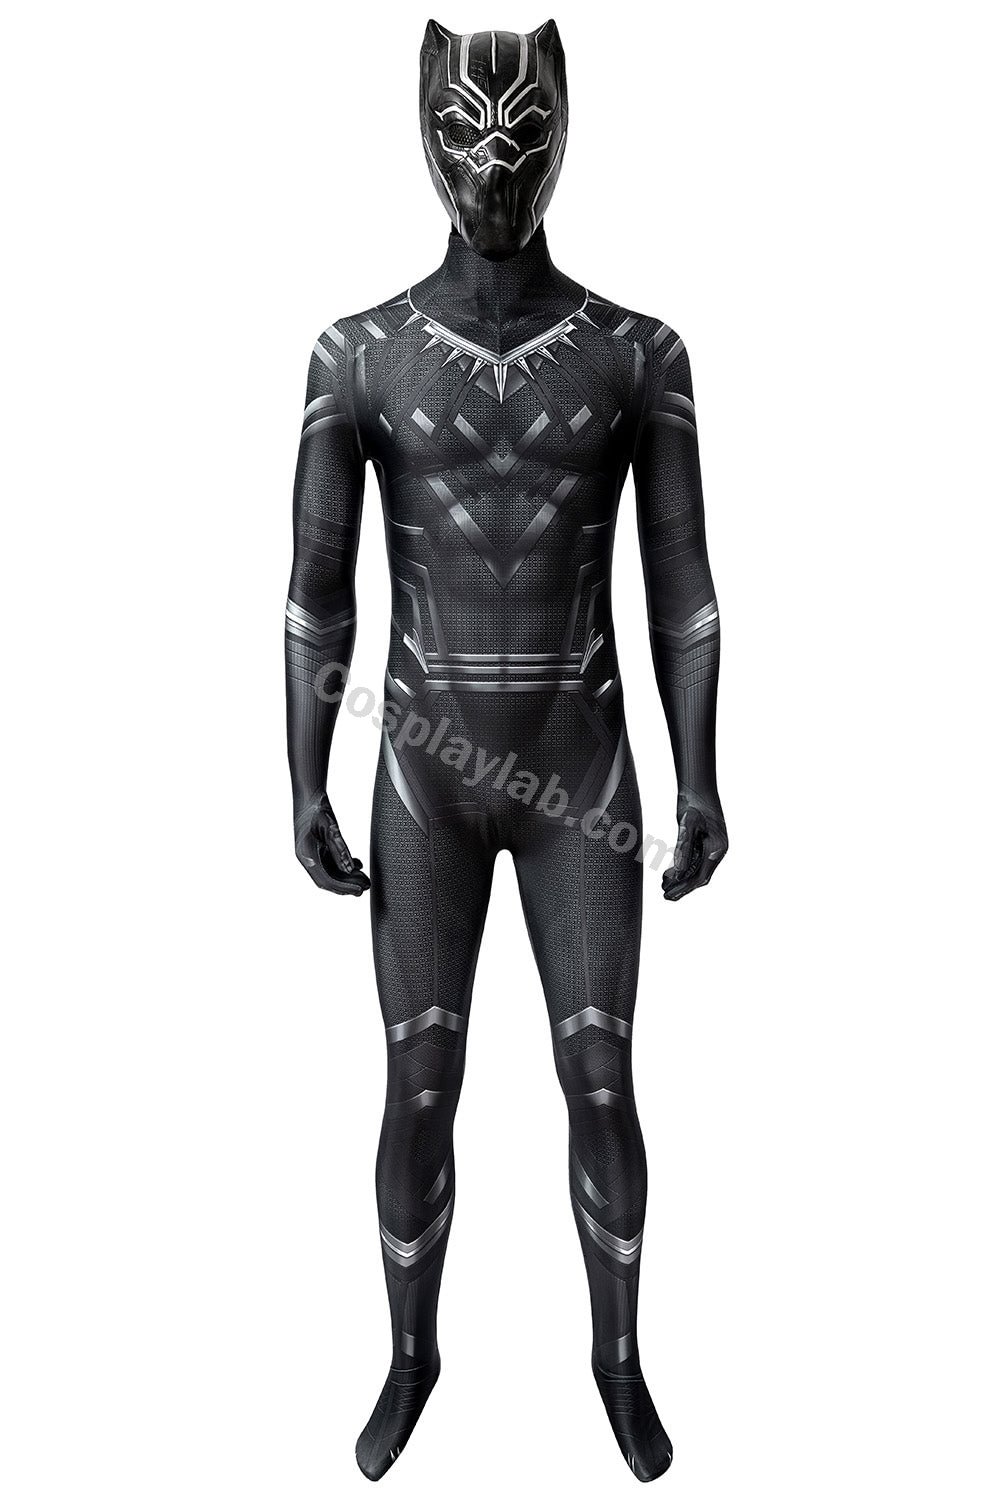 Black Panther Cosplay Costume 3D Printed T'challa Black Panther Cosplay Suit By CosplayLab